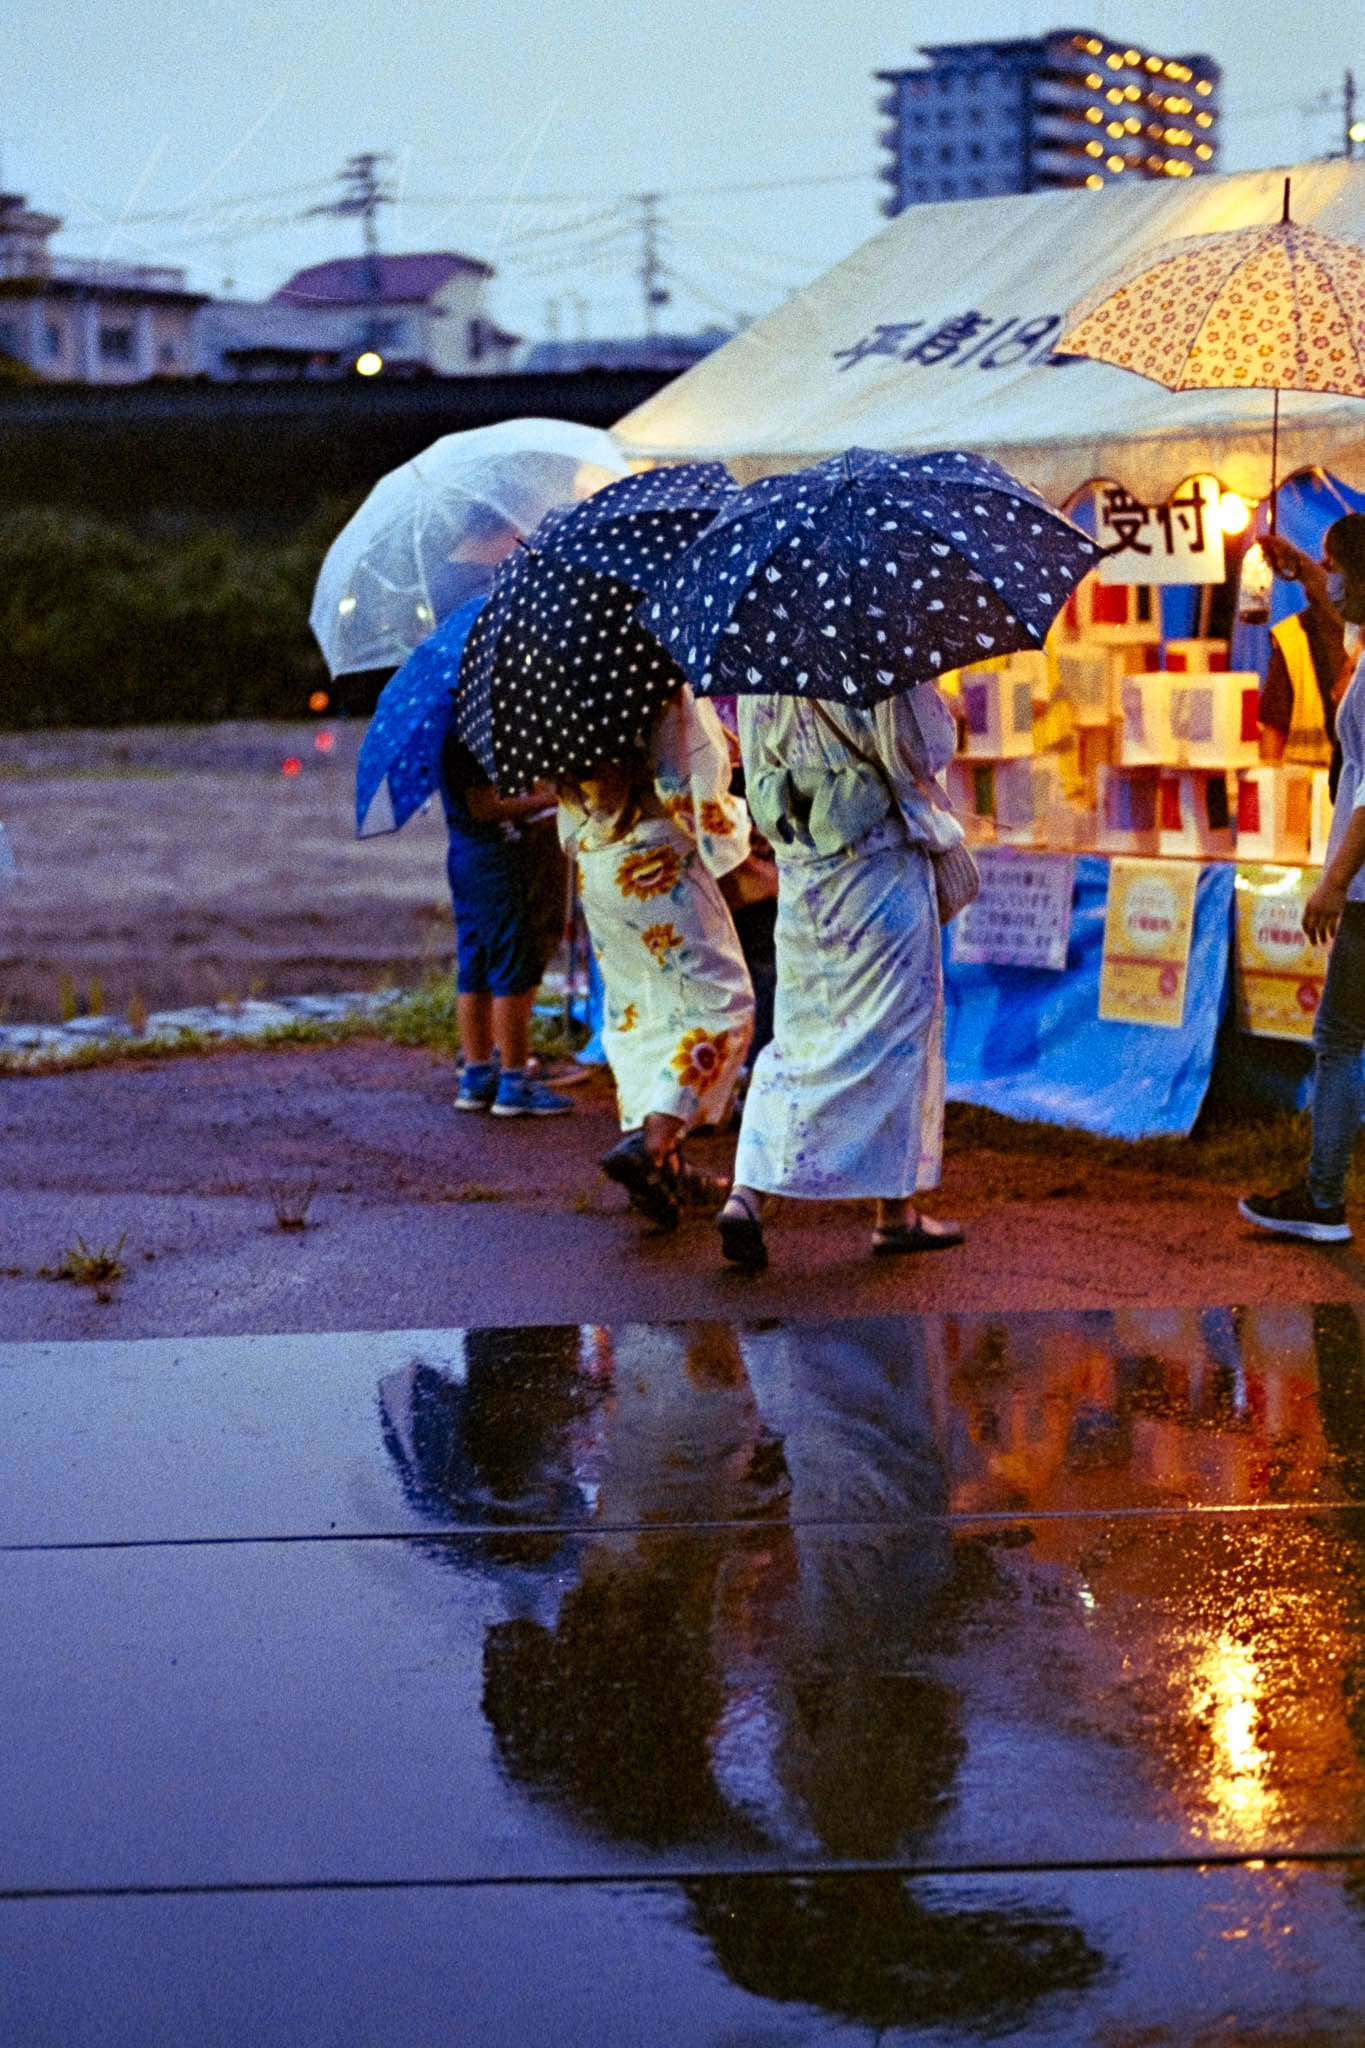 Group under colorful umbrellas on rainy evening, reflecting on wet ground near a lit food cart.